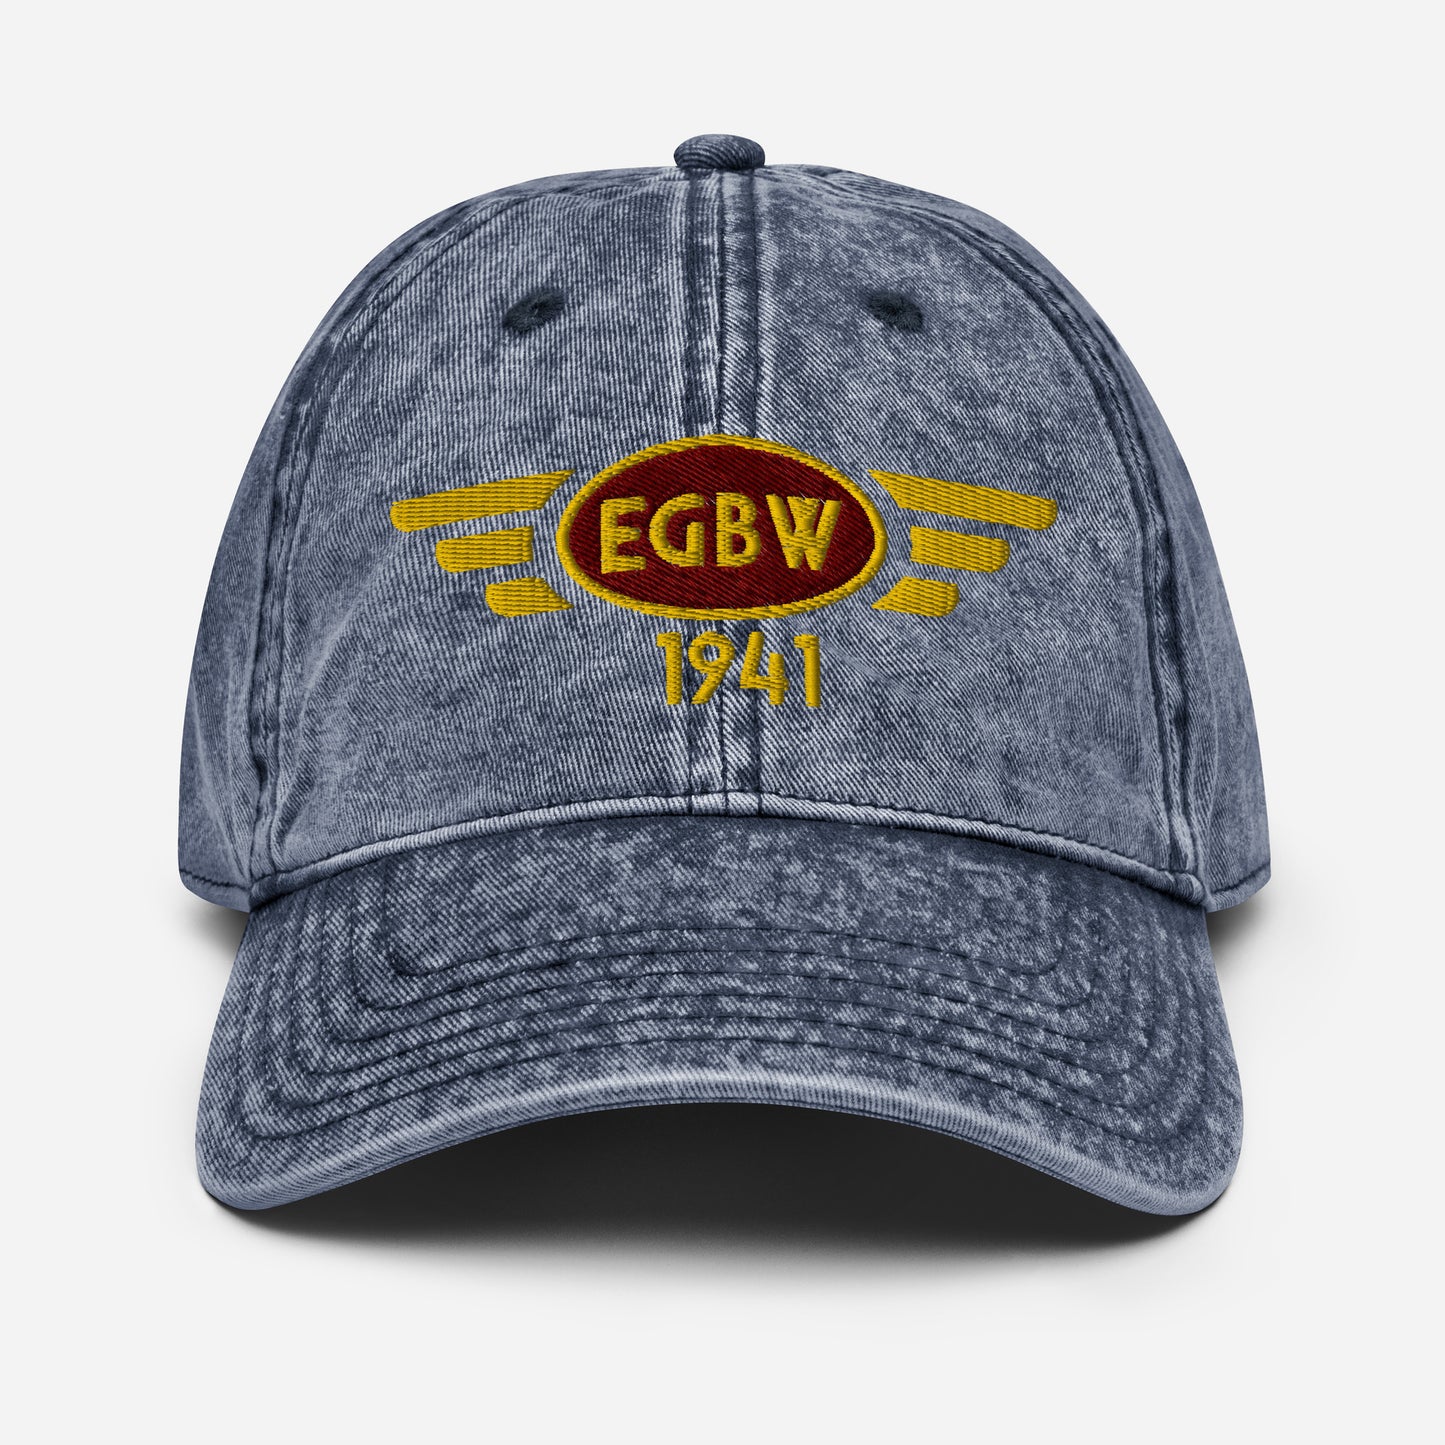 Wellsbourne Airfield vintage cotton twill baseball cap with embroidered ICAO code.